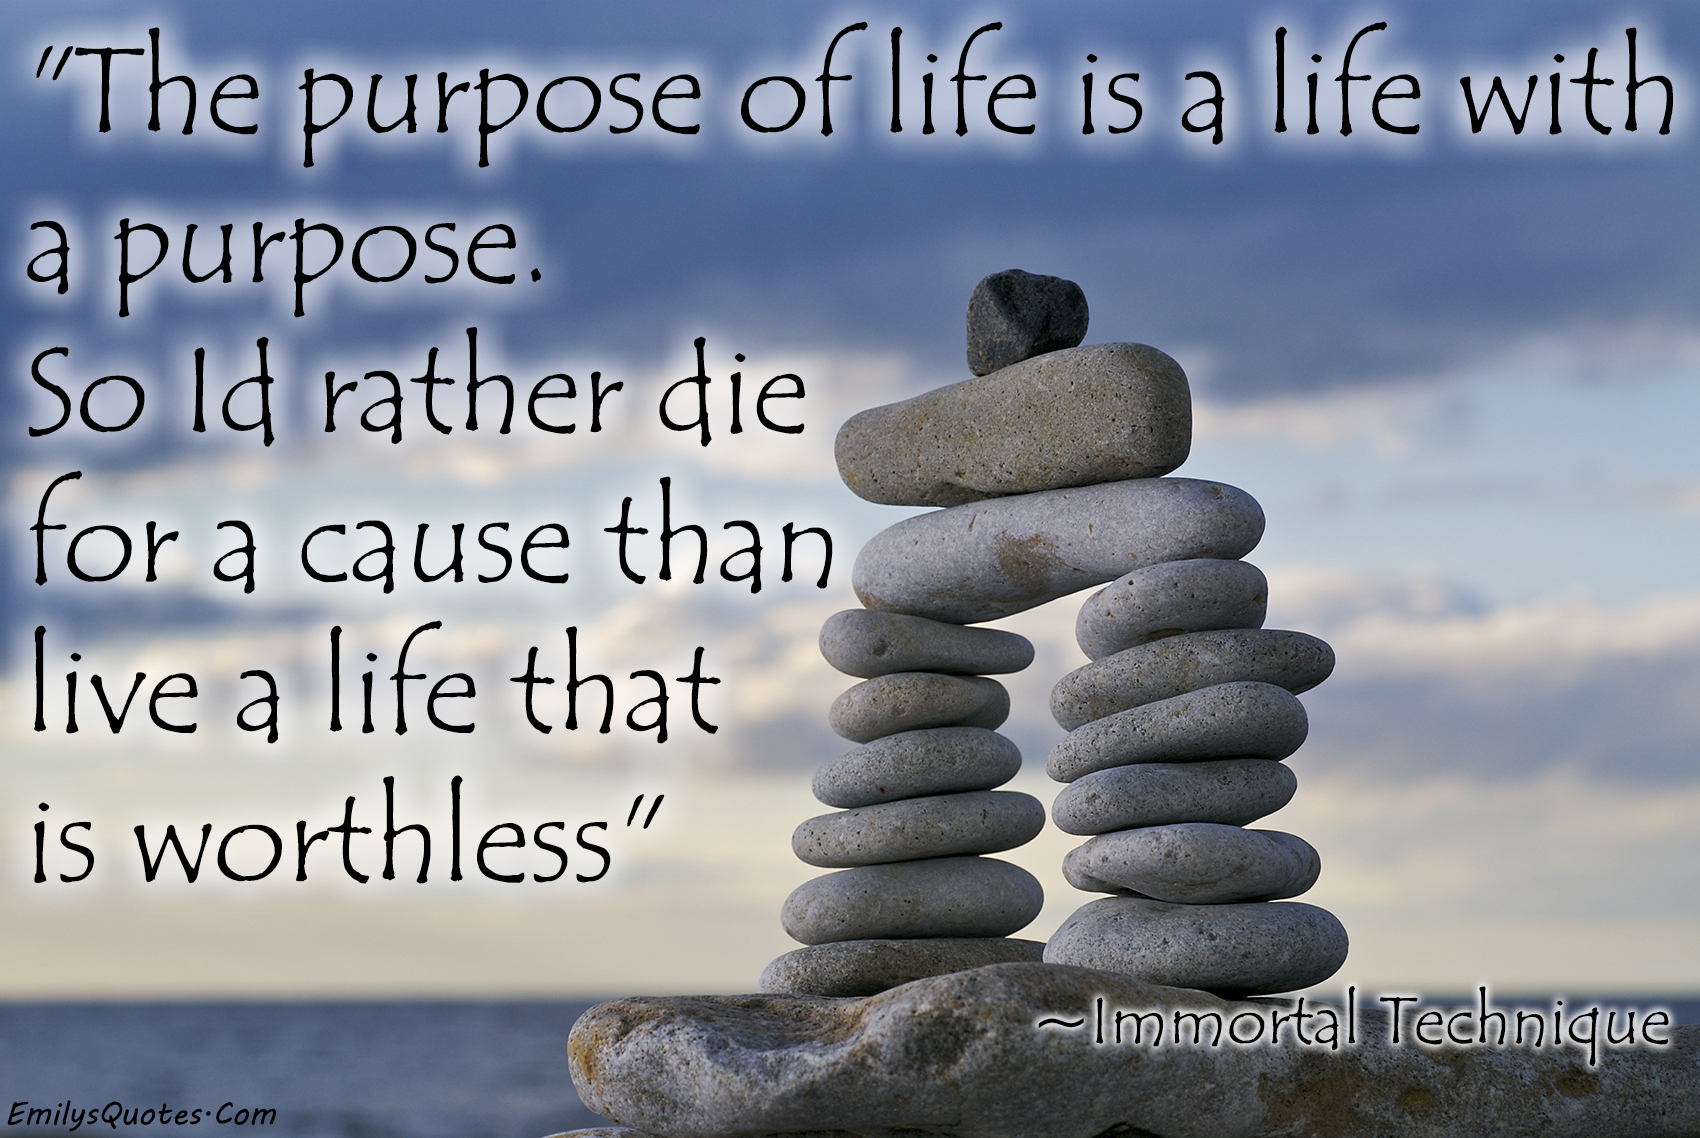 The purpose of life is a life with a purpose. So I’d rather die for a cause than live a life that is worthless